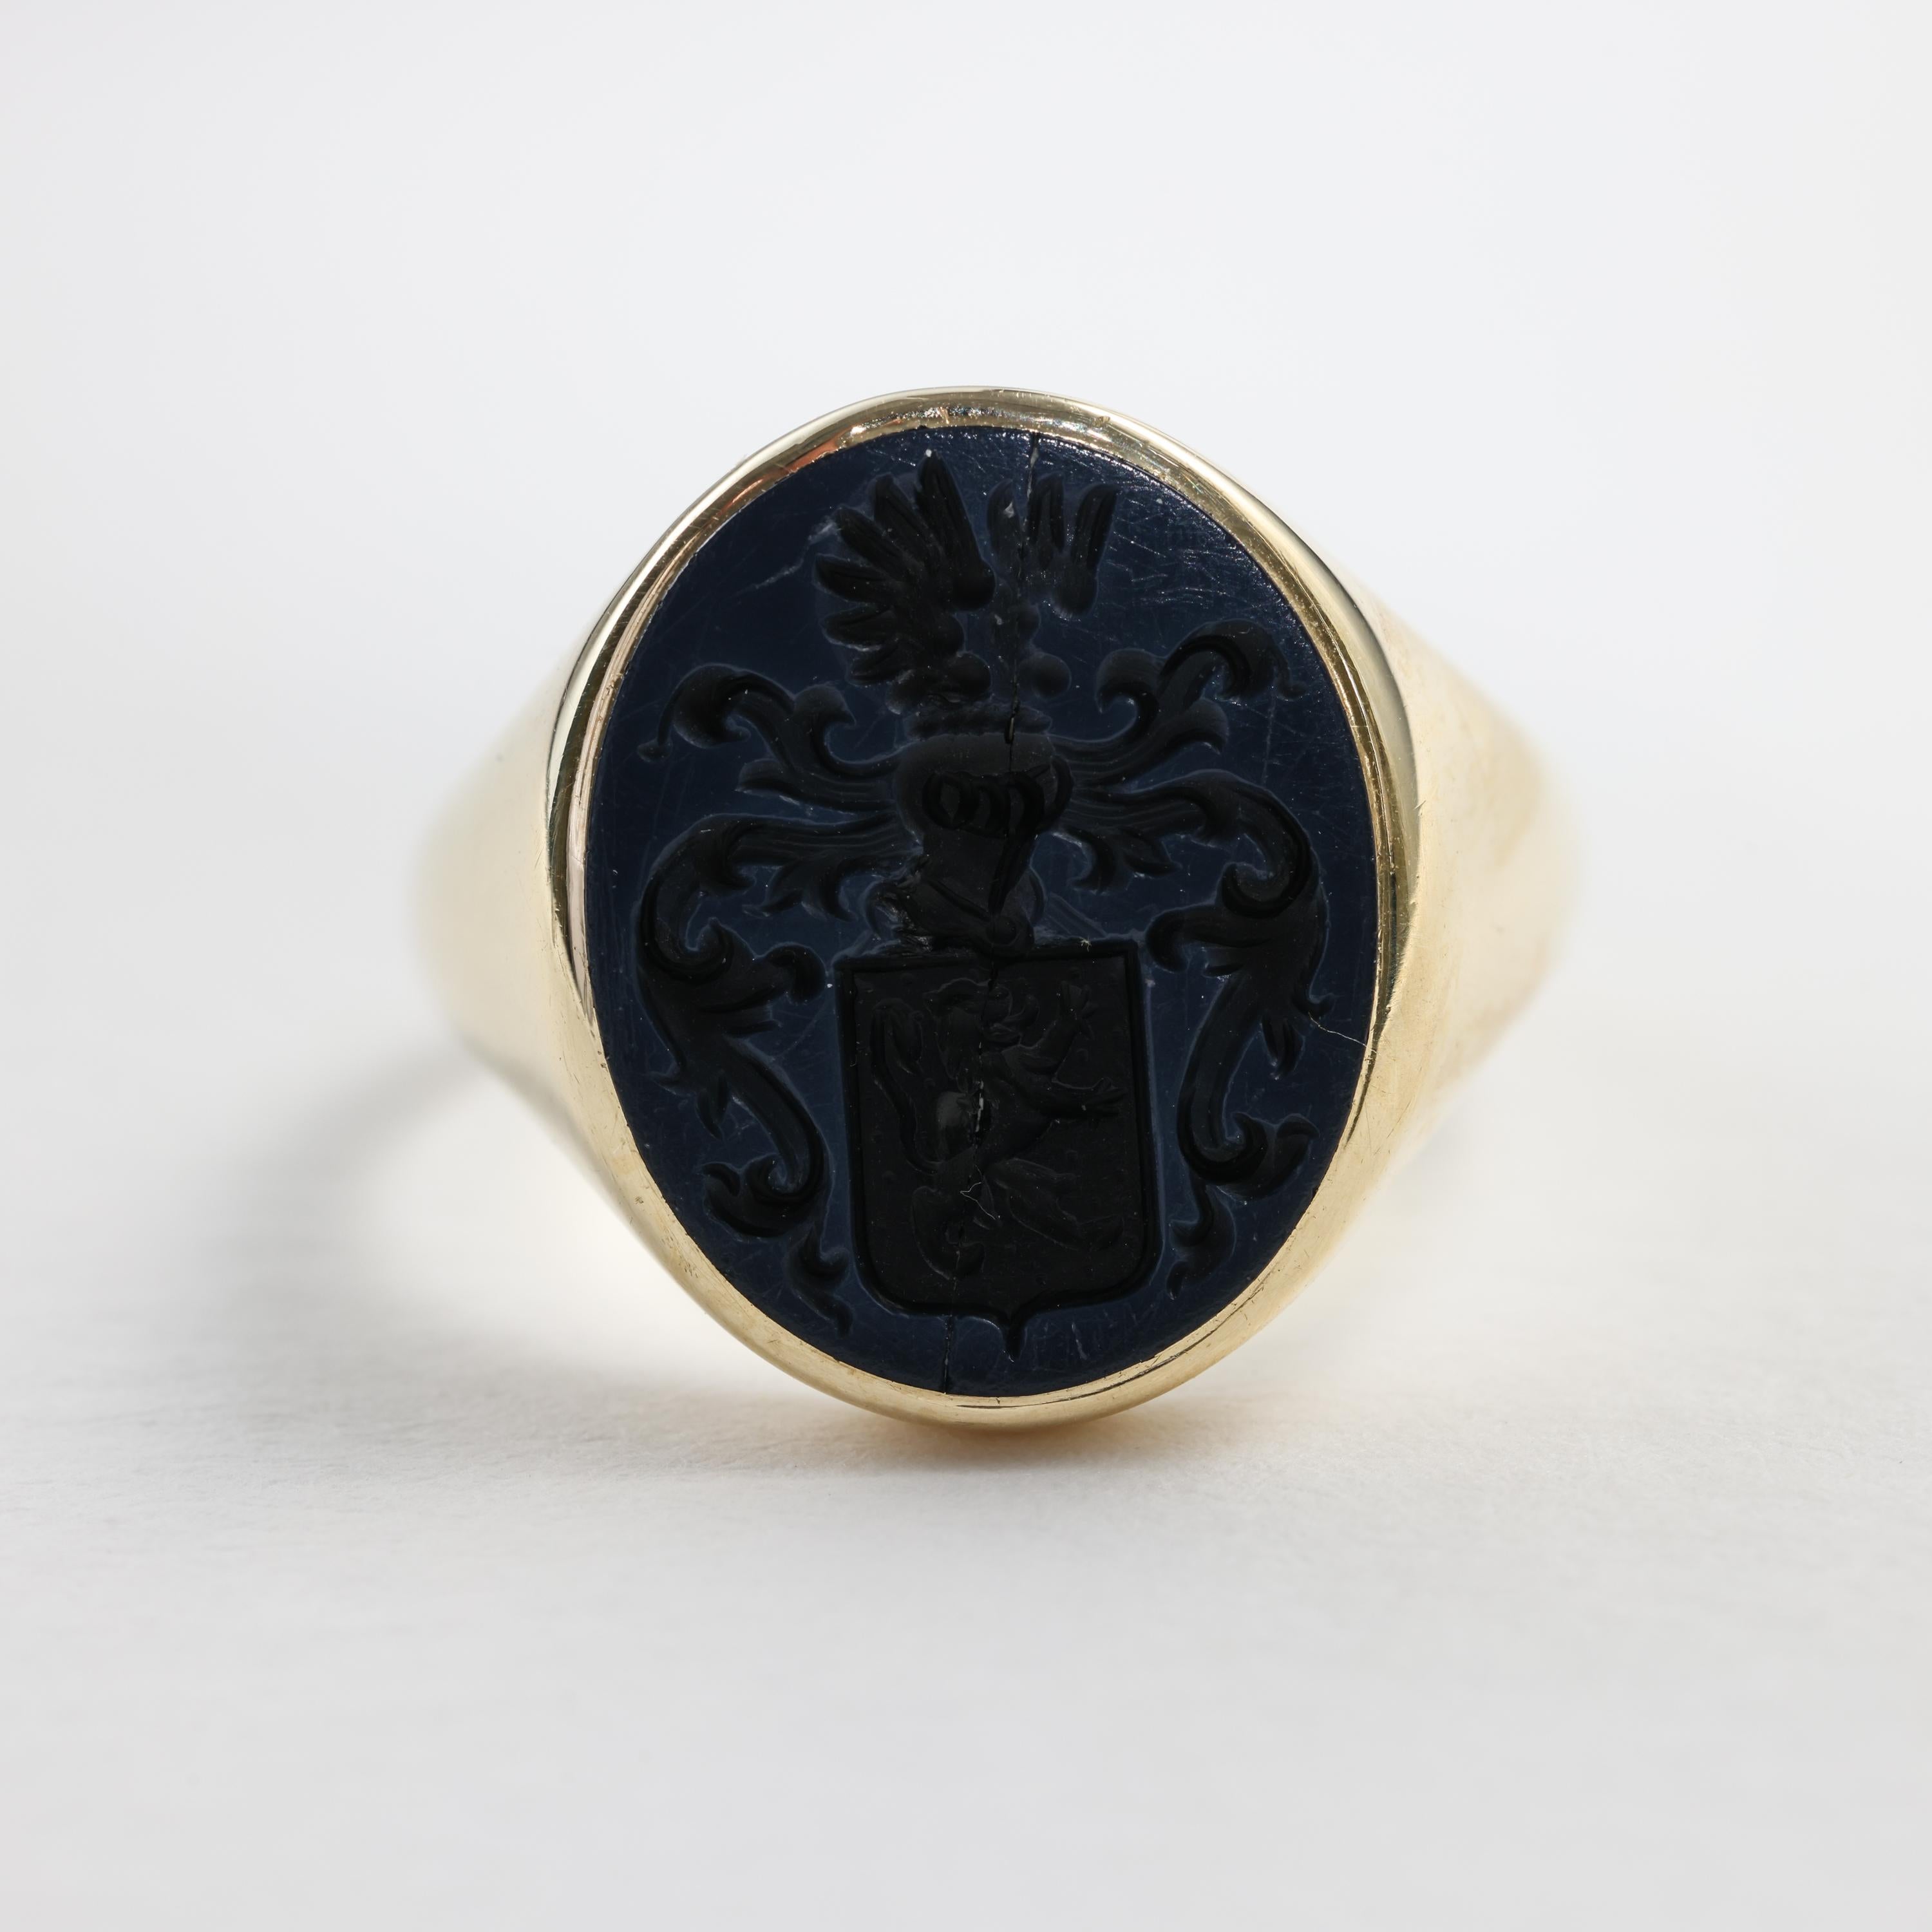 This Victorian-era deeply engraved family crest intaglio signet ring is crafted from 18K gold and agate. The interior bears marks too worn to read, but the gold was tested and the ring made in England.

The ring is simultaneously understated and